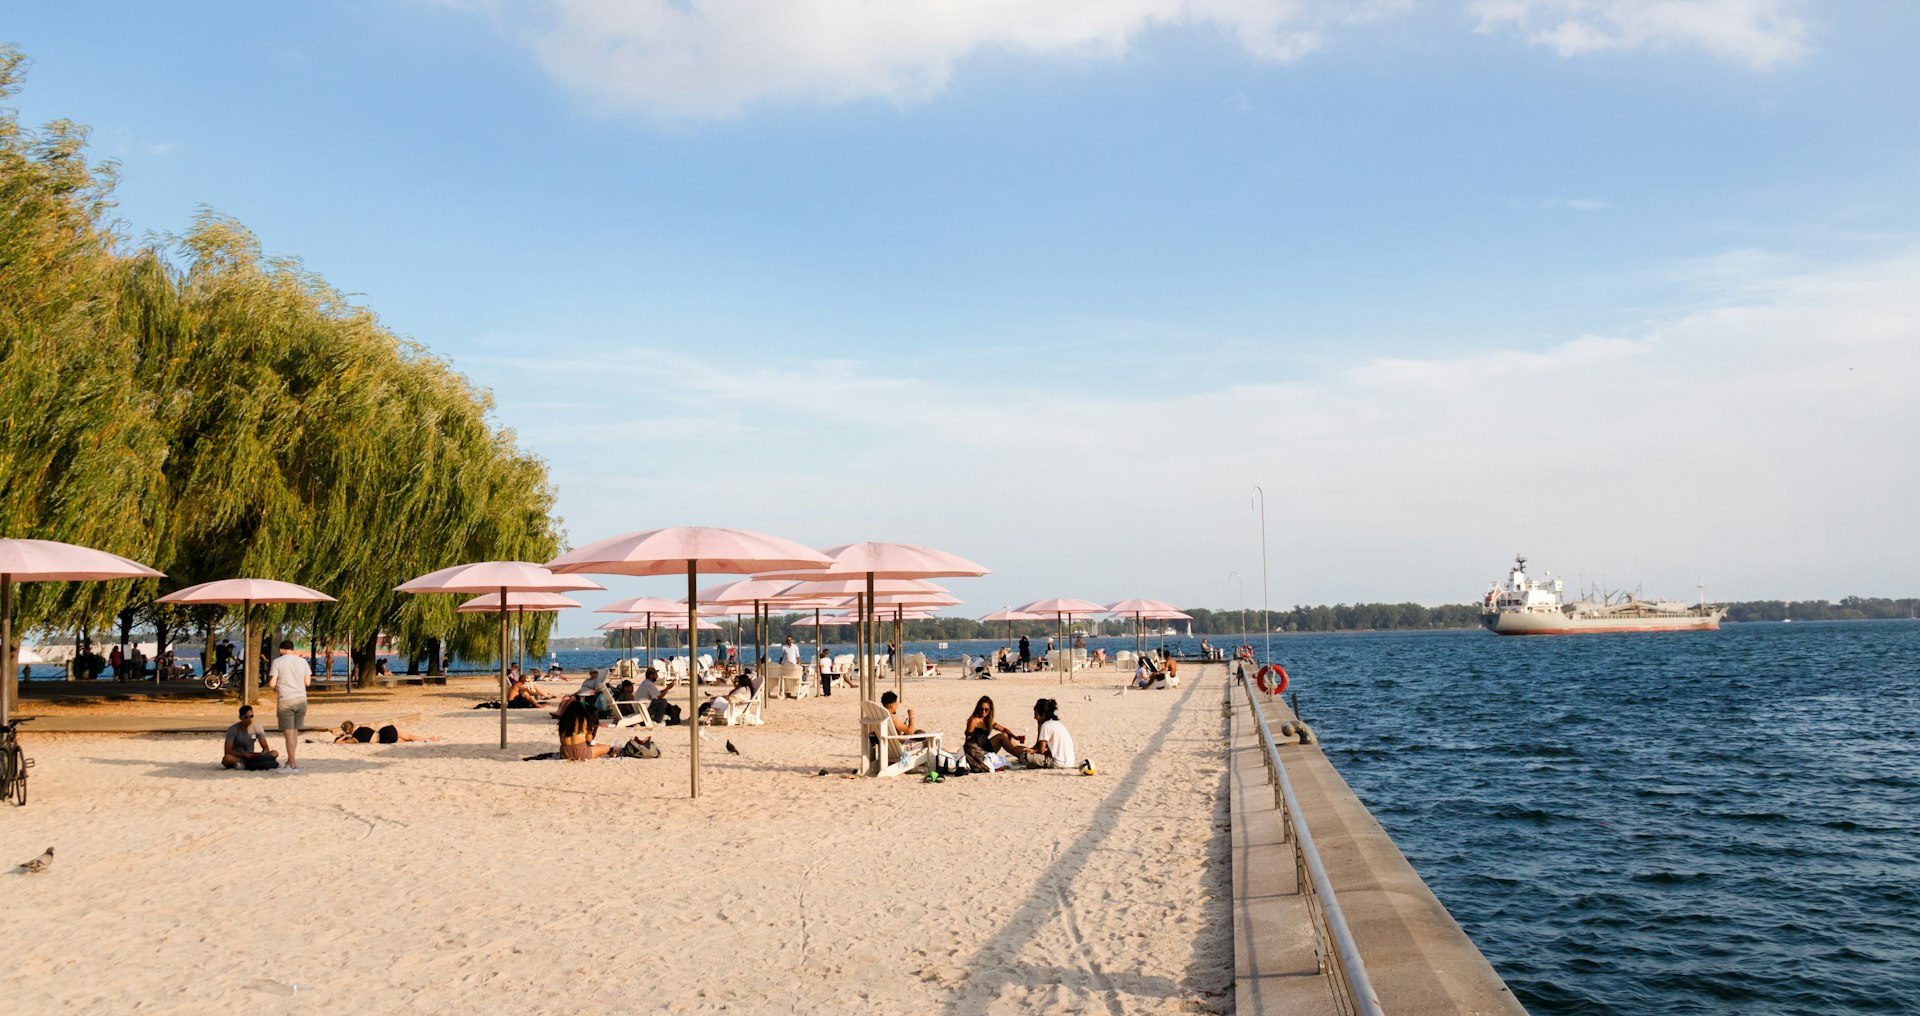 People in downtown Toronto rest under pink umbrellas on a beach beside a lake as a large cargo ship passes by